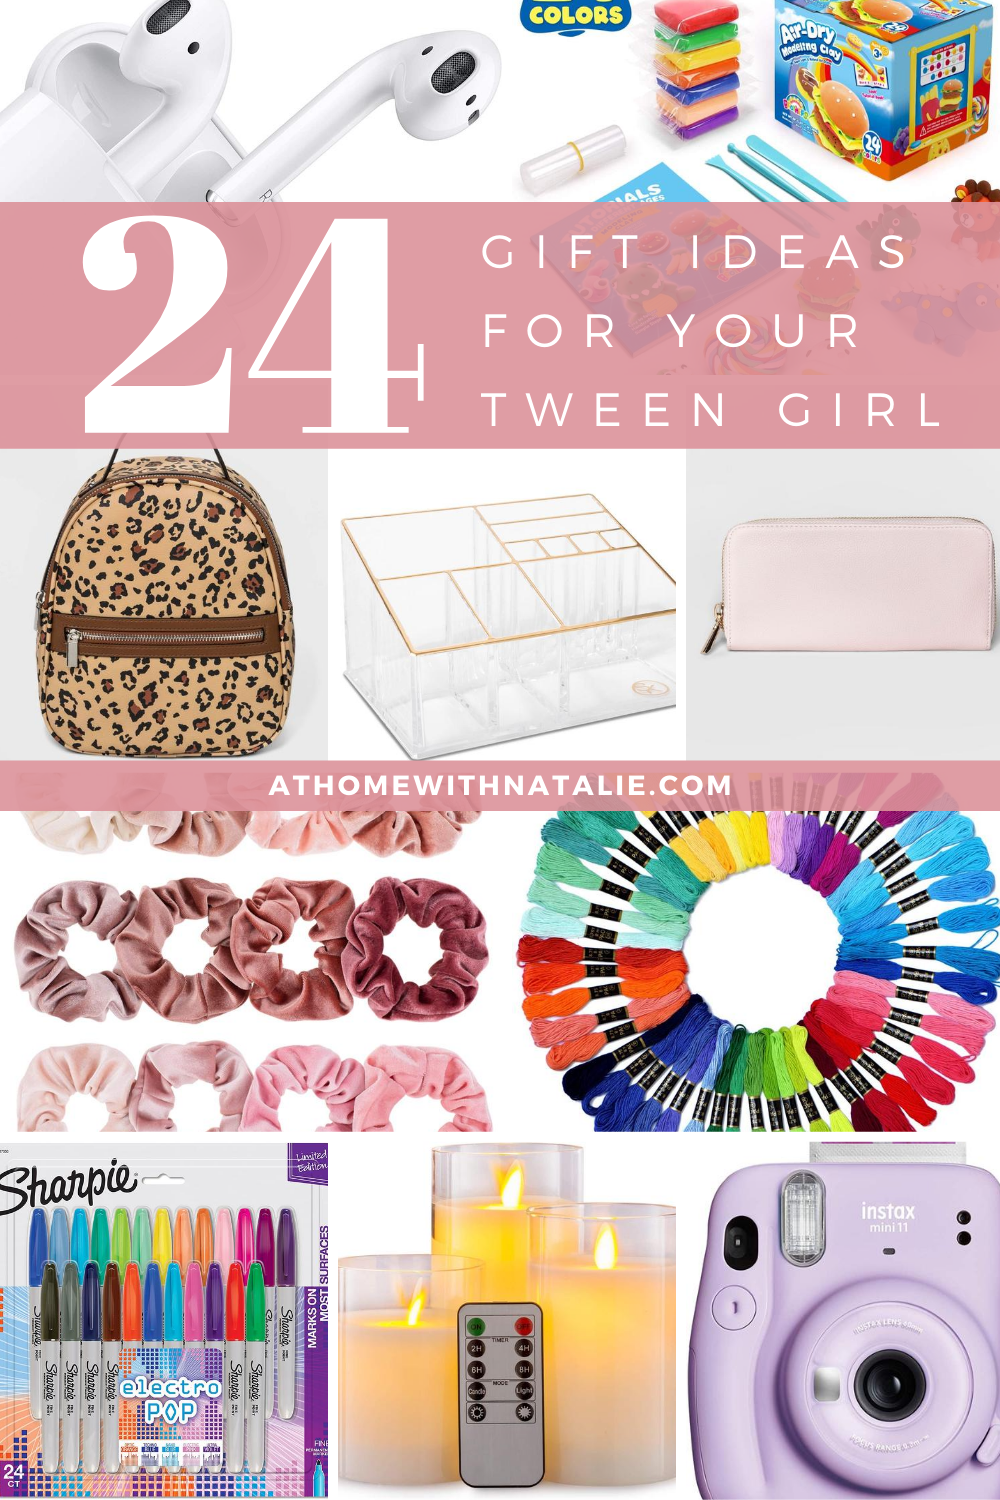 Cute Pink Gift Ideas: 22 Gifts That Are Pink in Color